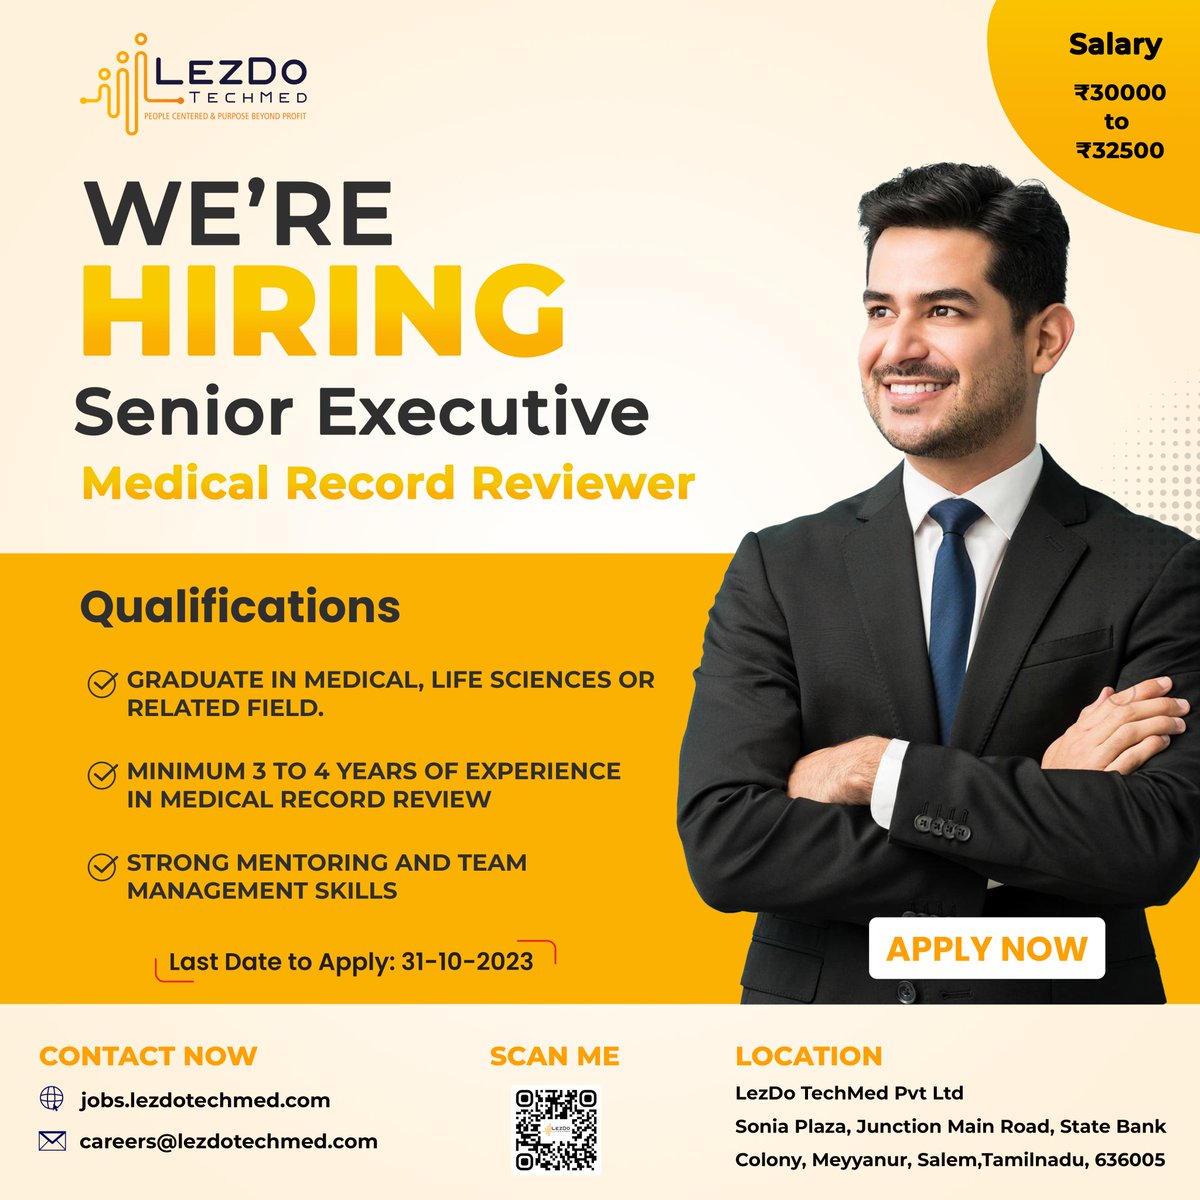 Step into a role where your expertise is valued and your vision is encouraged. LezDo TechMed is hiring a Senior Executive Medical Record Reviewer.
#LezDoTechMed #lezdotechmedindia #LezDoans #JoinOurTeam #CareerOpportunity #LezDoFamily #SeniorExecutive #MedicalRecordReviewer